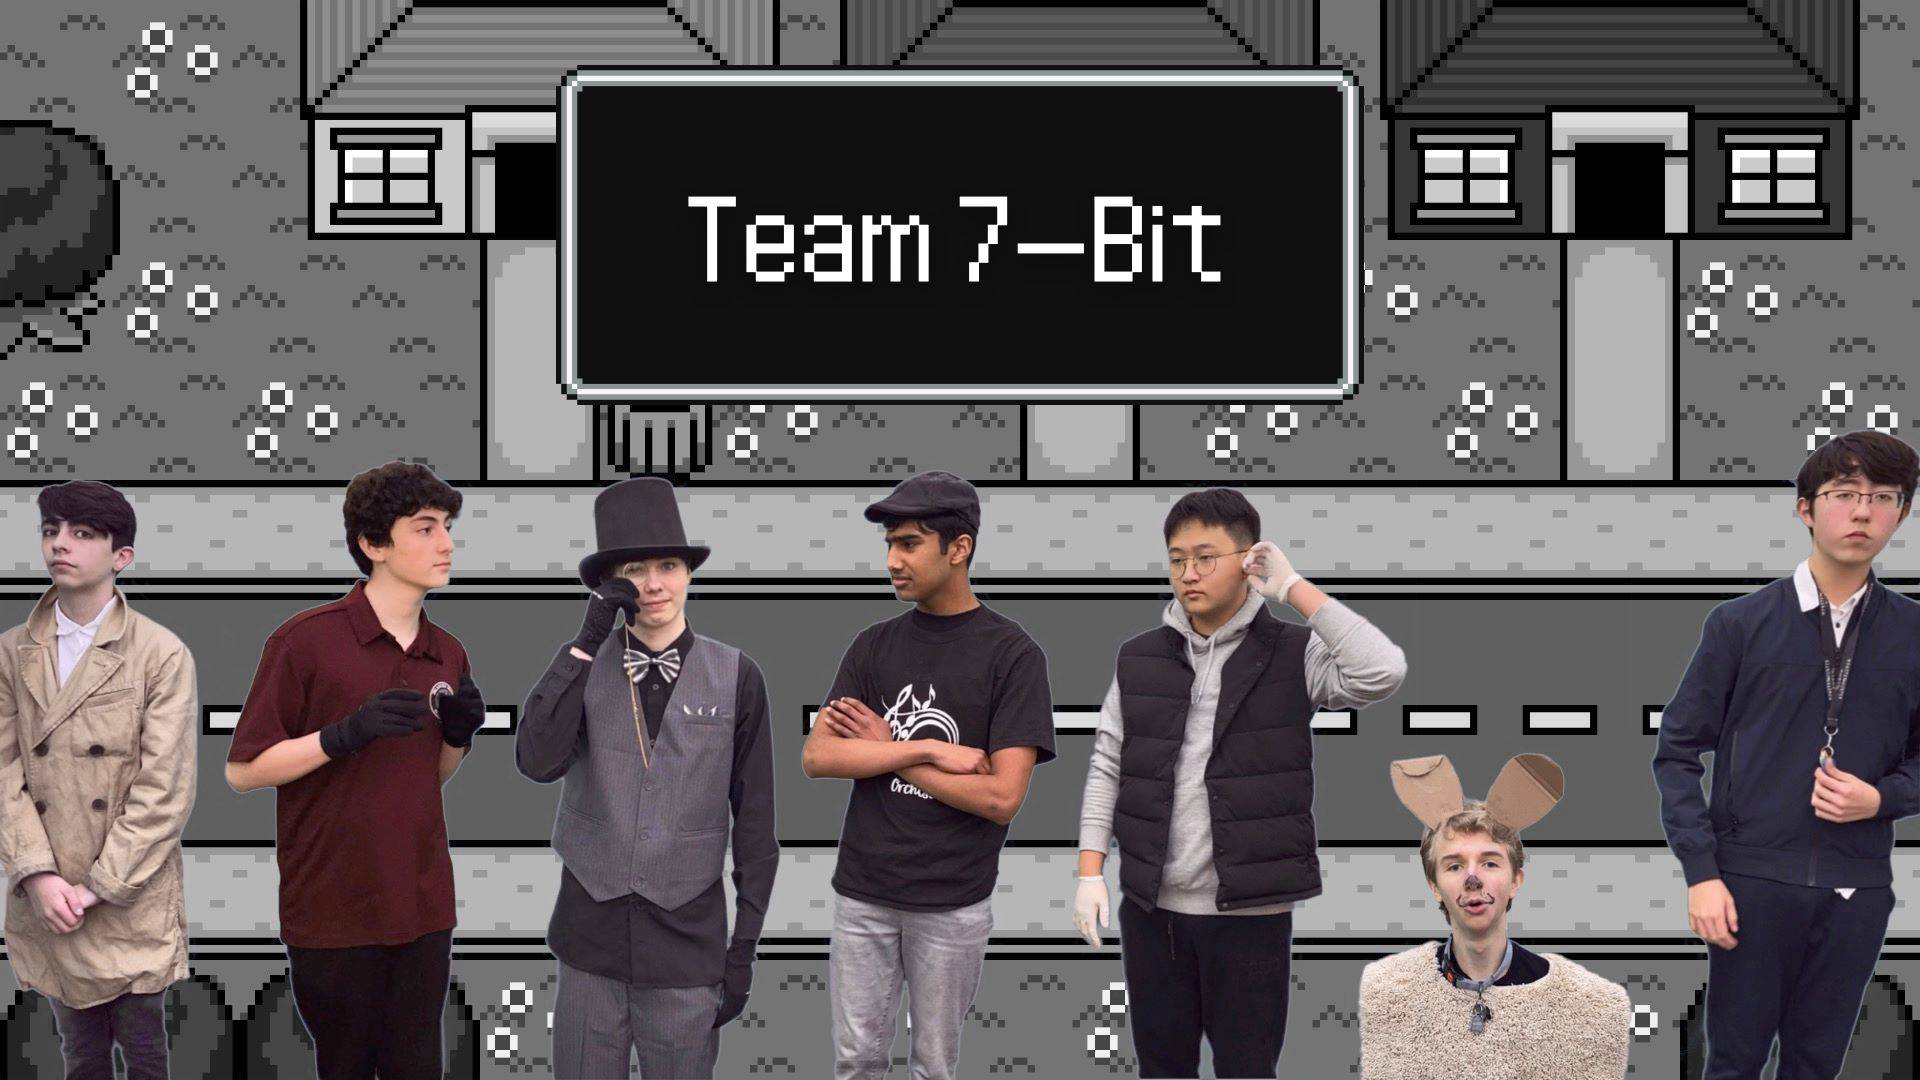 From left to right, Mercer Island High School’s Team 7-Bit perform in “Detective Quest,” Julius Perez, Daniel Marcus, Tyler Langley, Sidh Shroff, Sol Park, Lucas Lessard and Eliot Geer. Courtesy photo